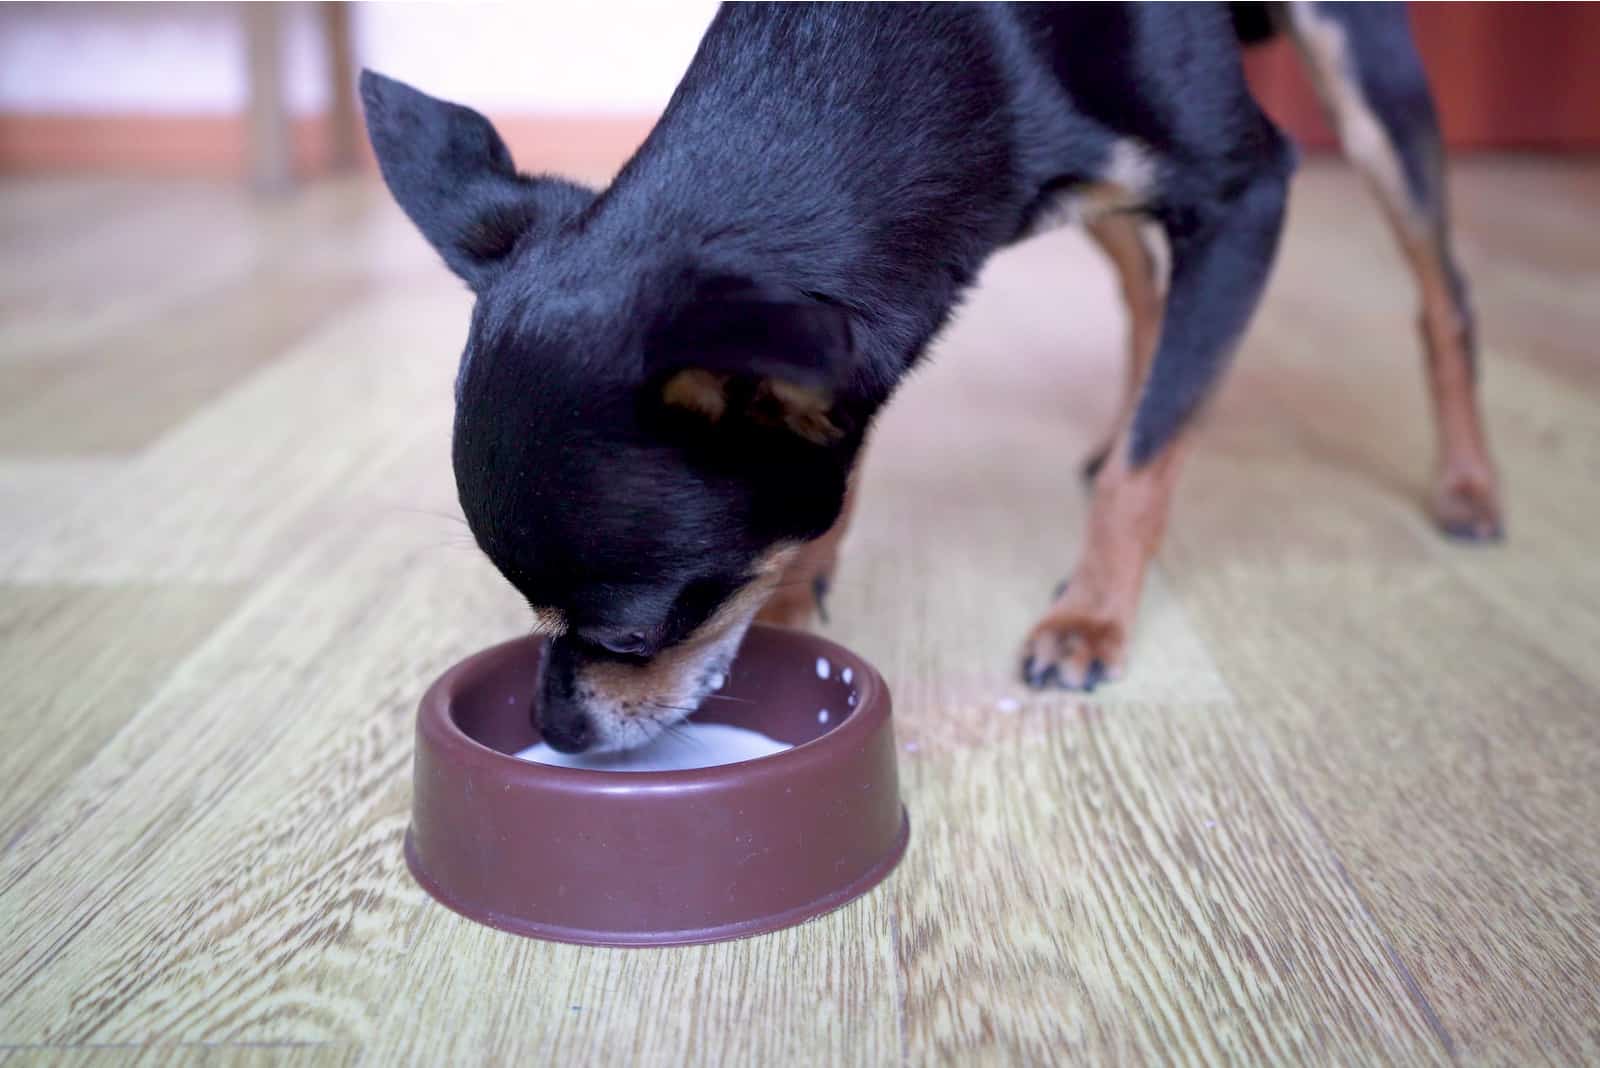 the dog eats milk from a bowl